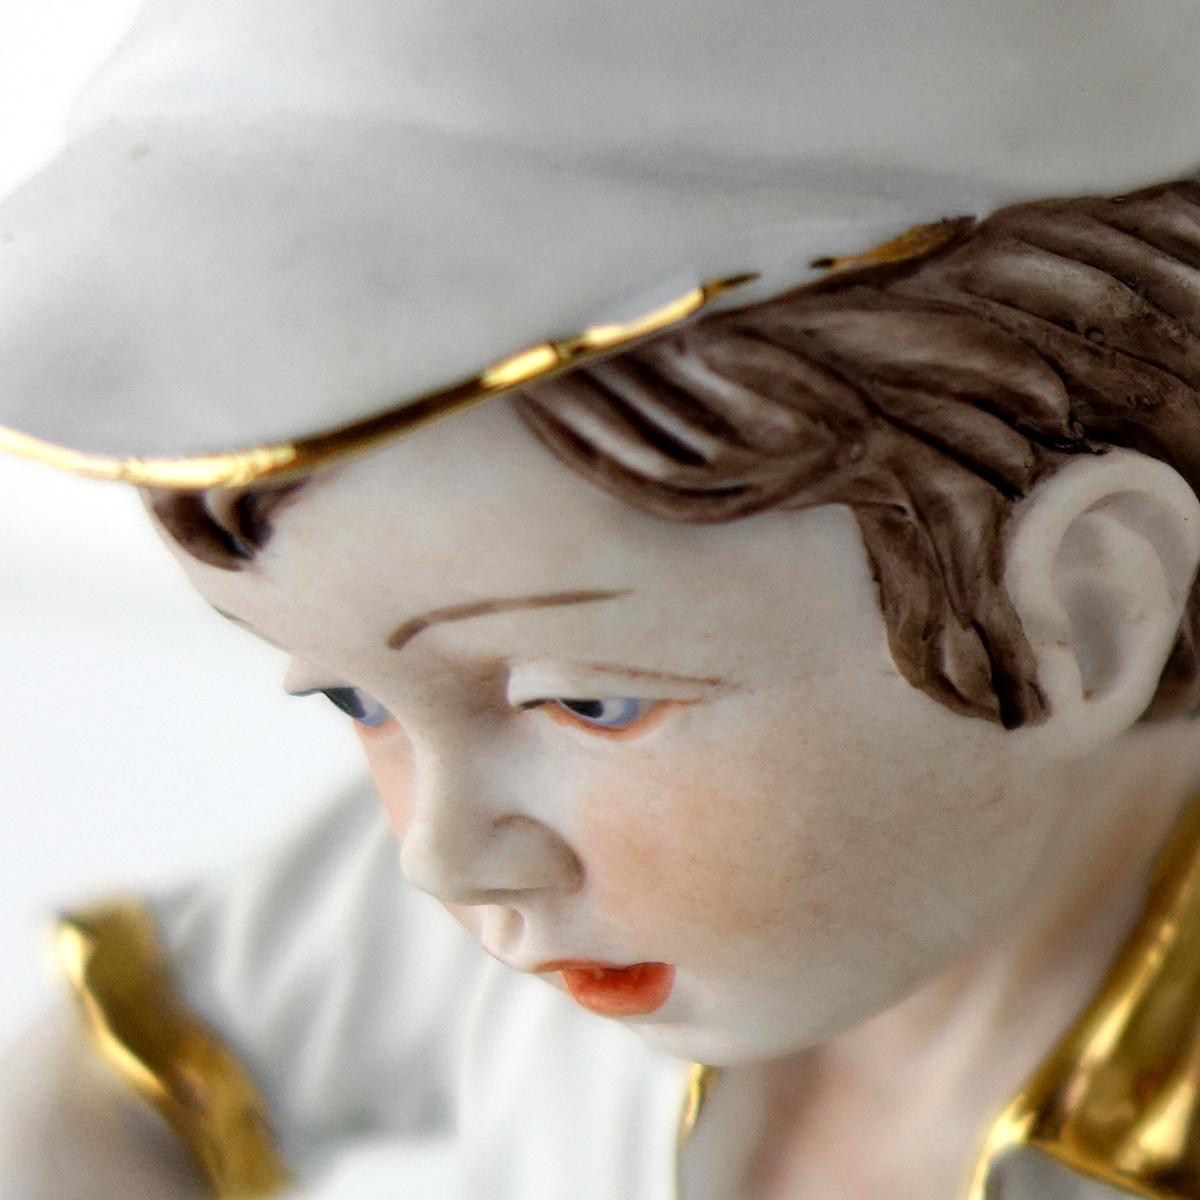 Biscuit Porcelain Statuette of Two Boys Eating a Melon with Gold-Colored Details For Sale 4